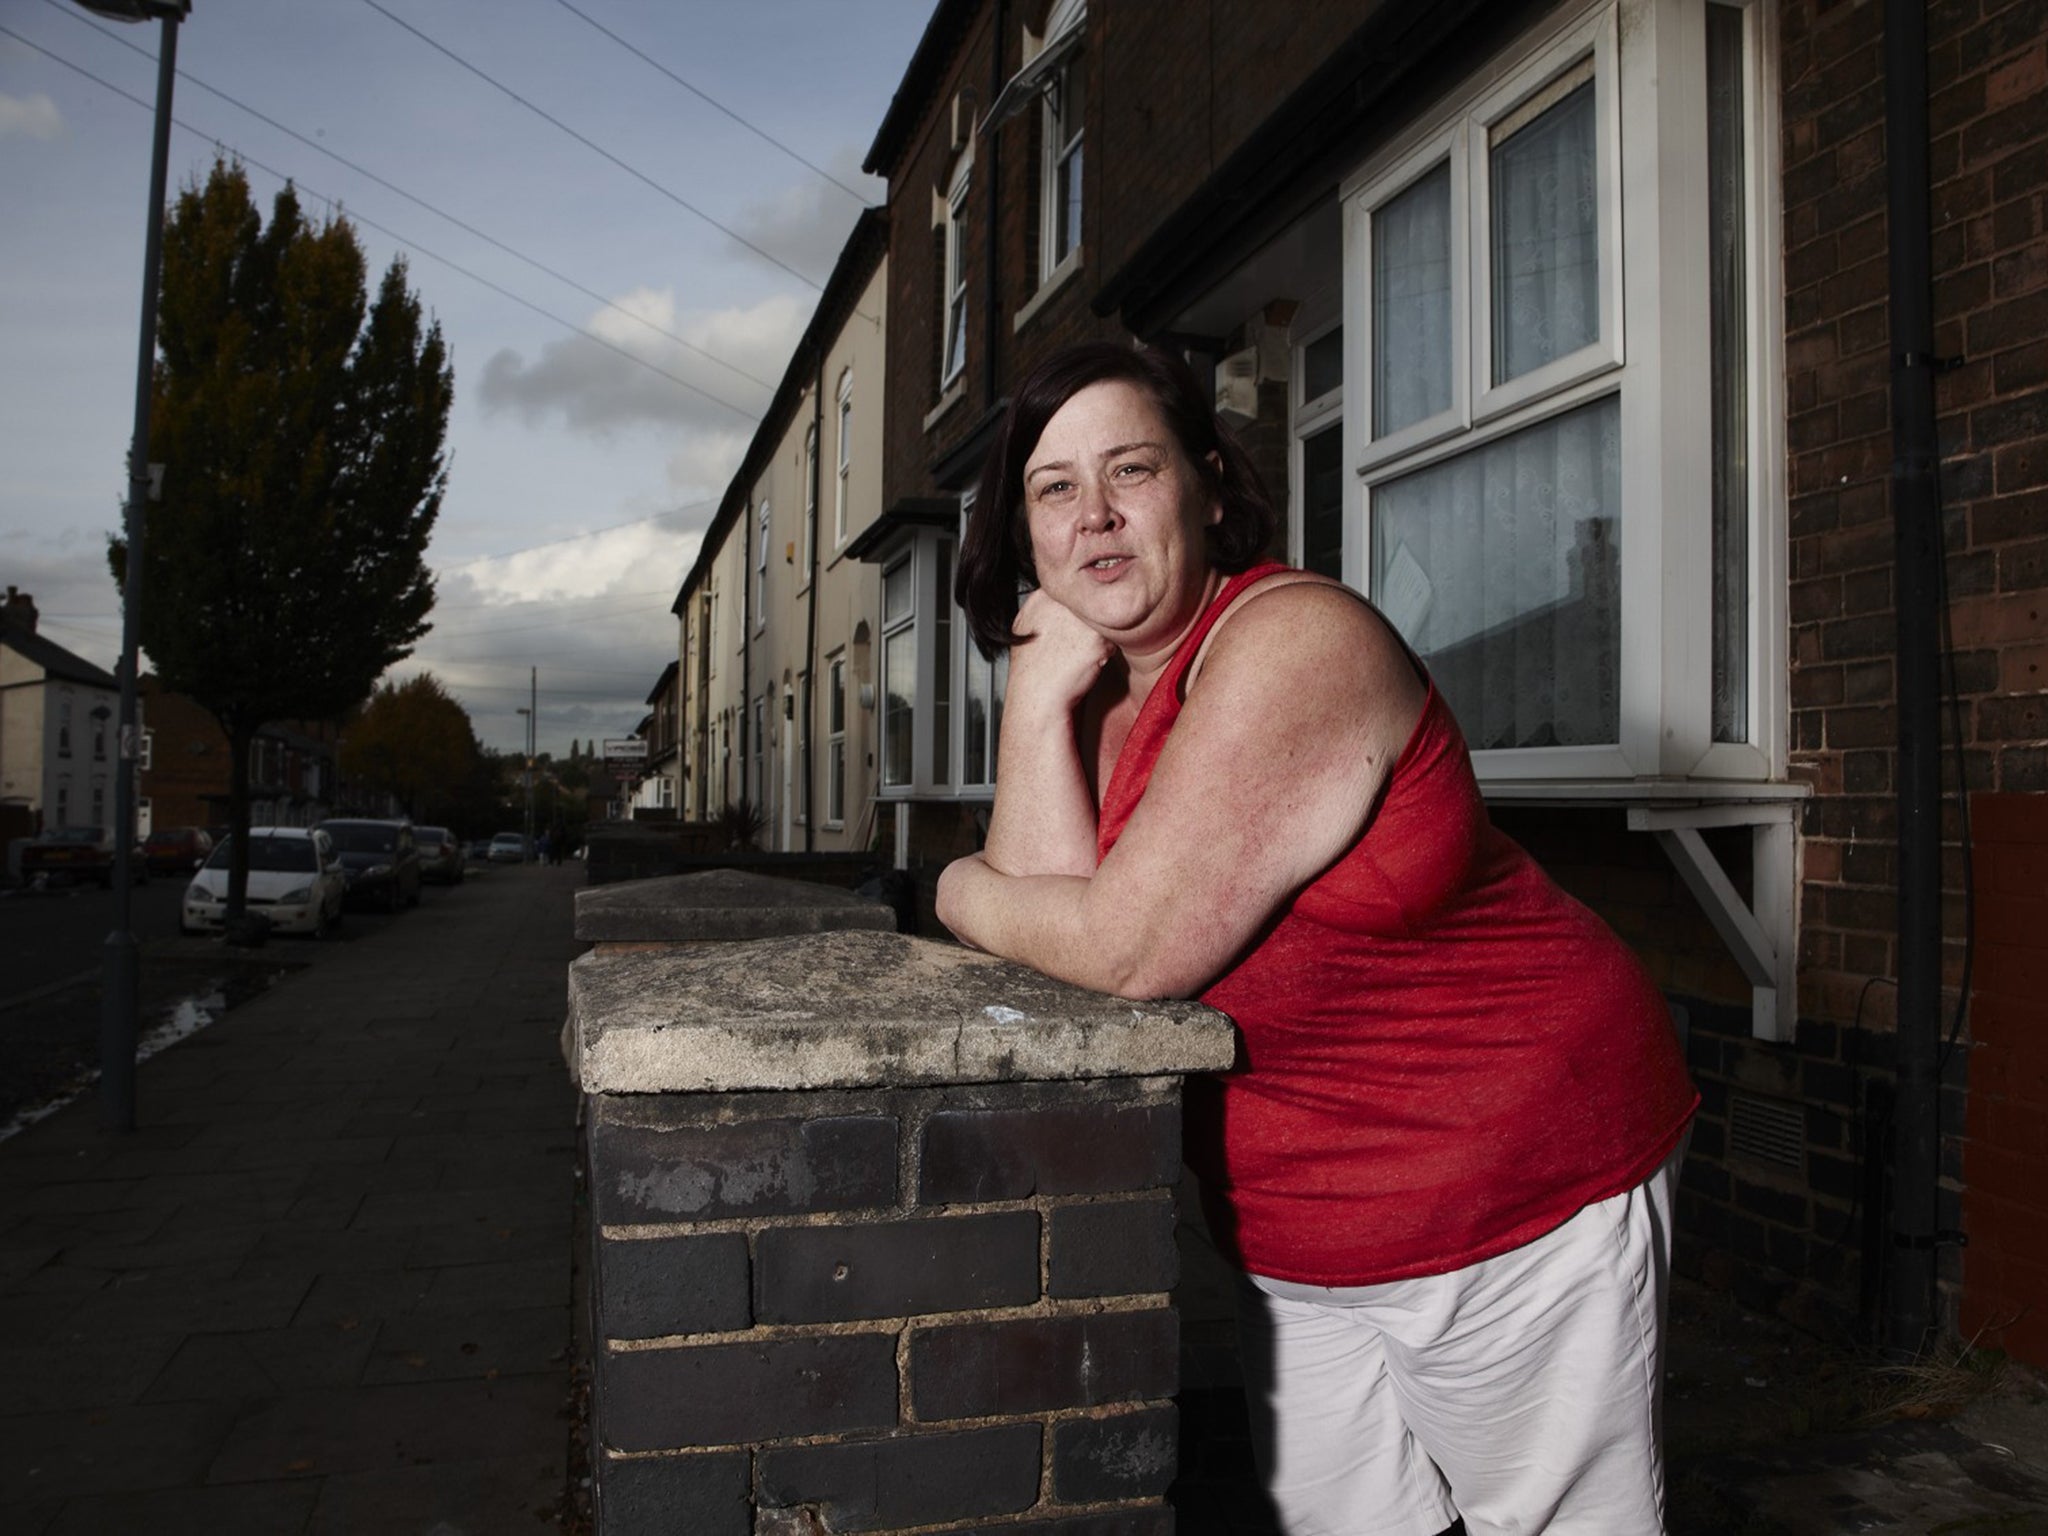 Channel 4’s 'Benefits Street' popularised the idea